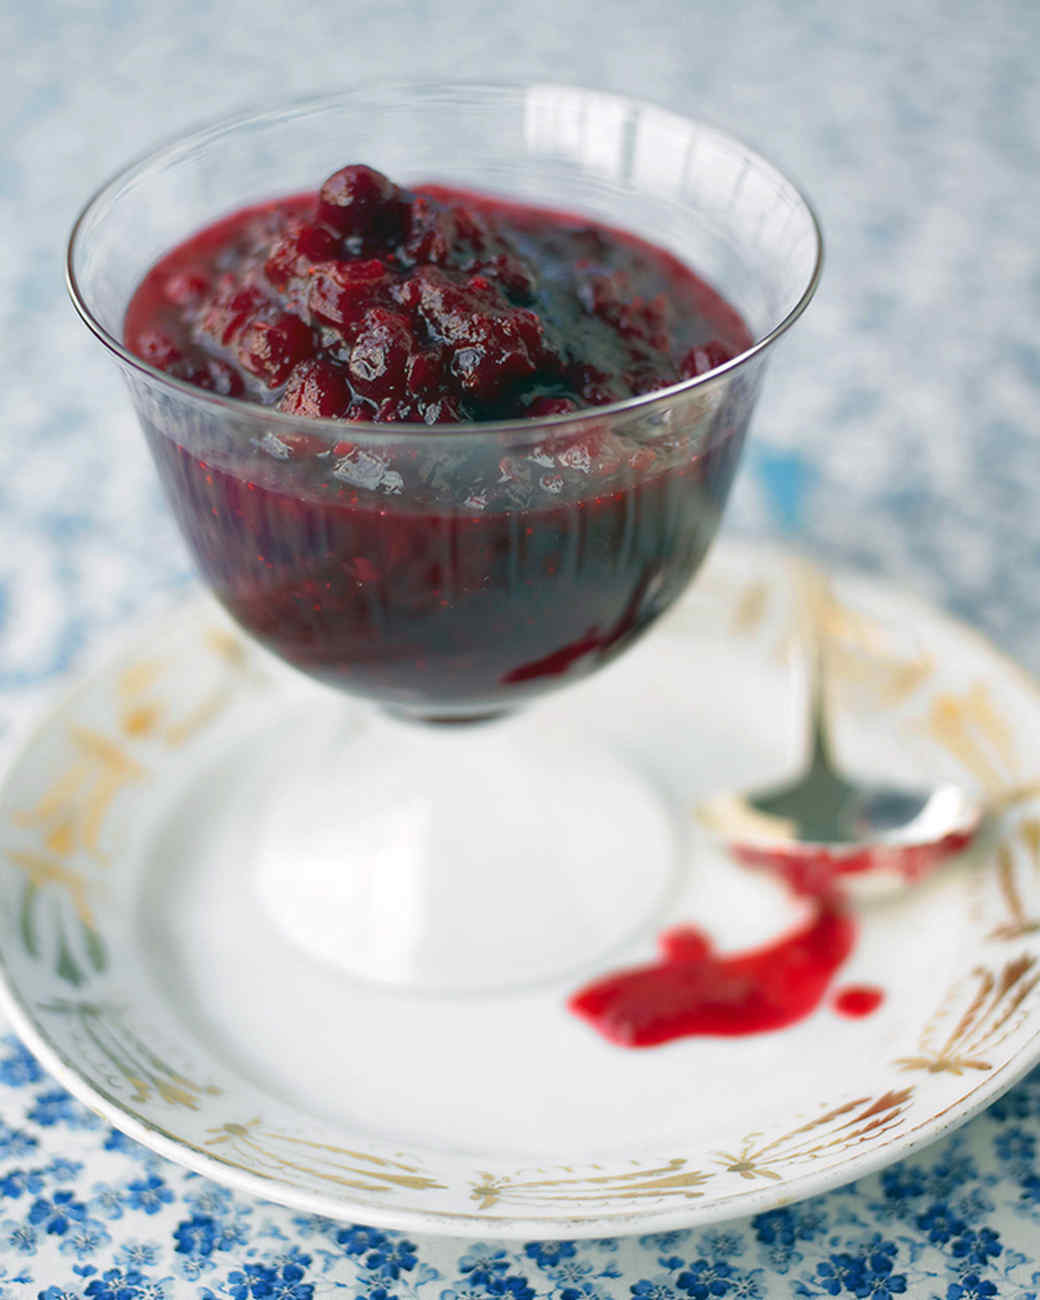 Cranberry Sauce Recipes For Thanksgiving
 Easy Cranberry Sauce Recipes